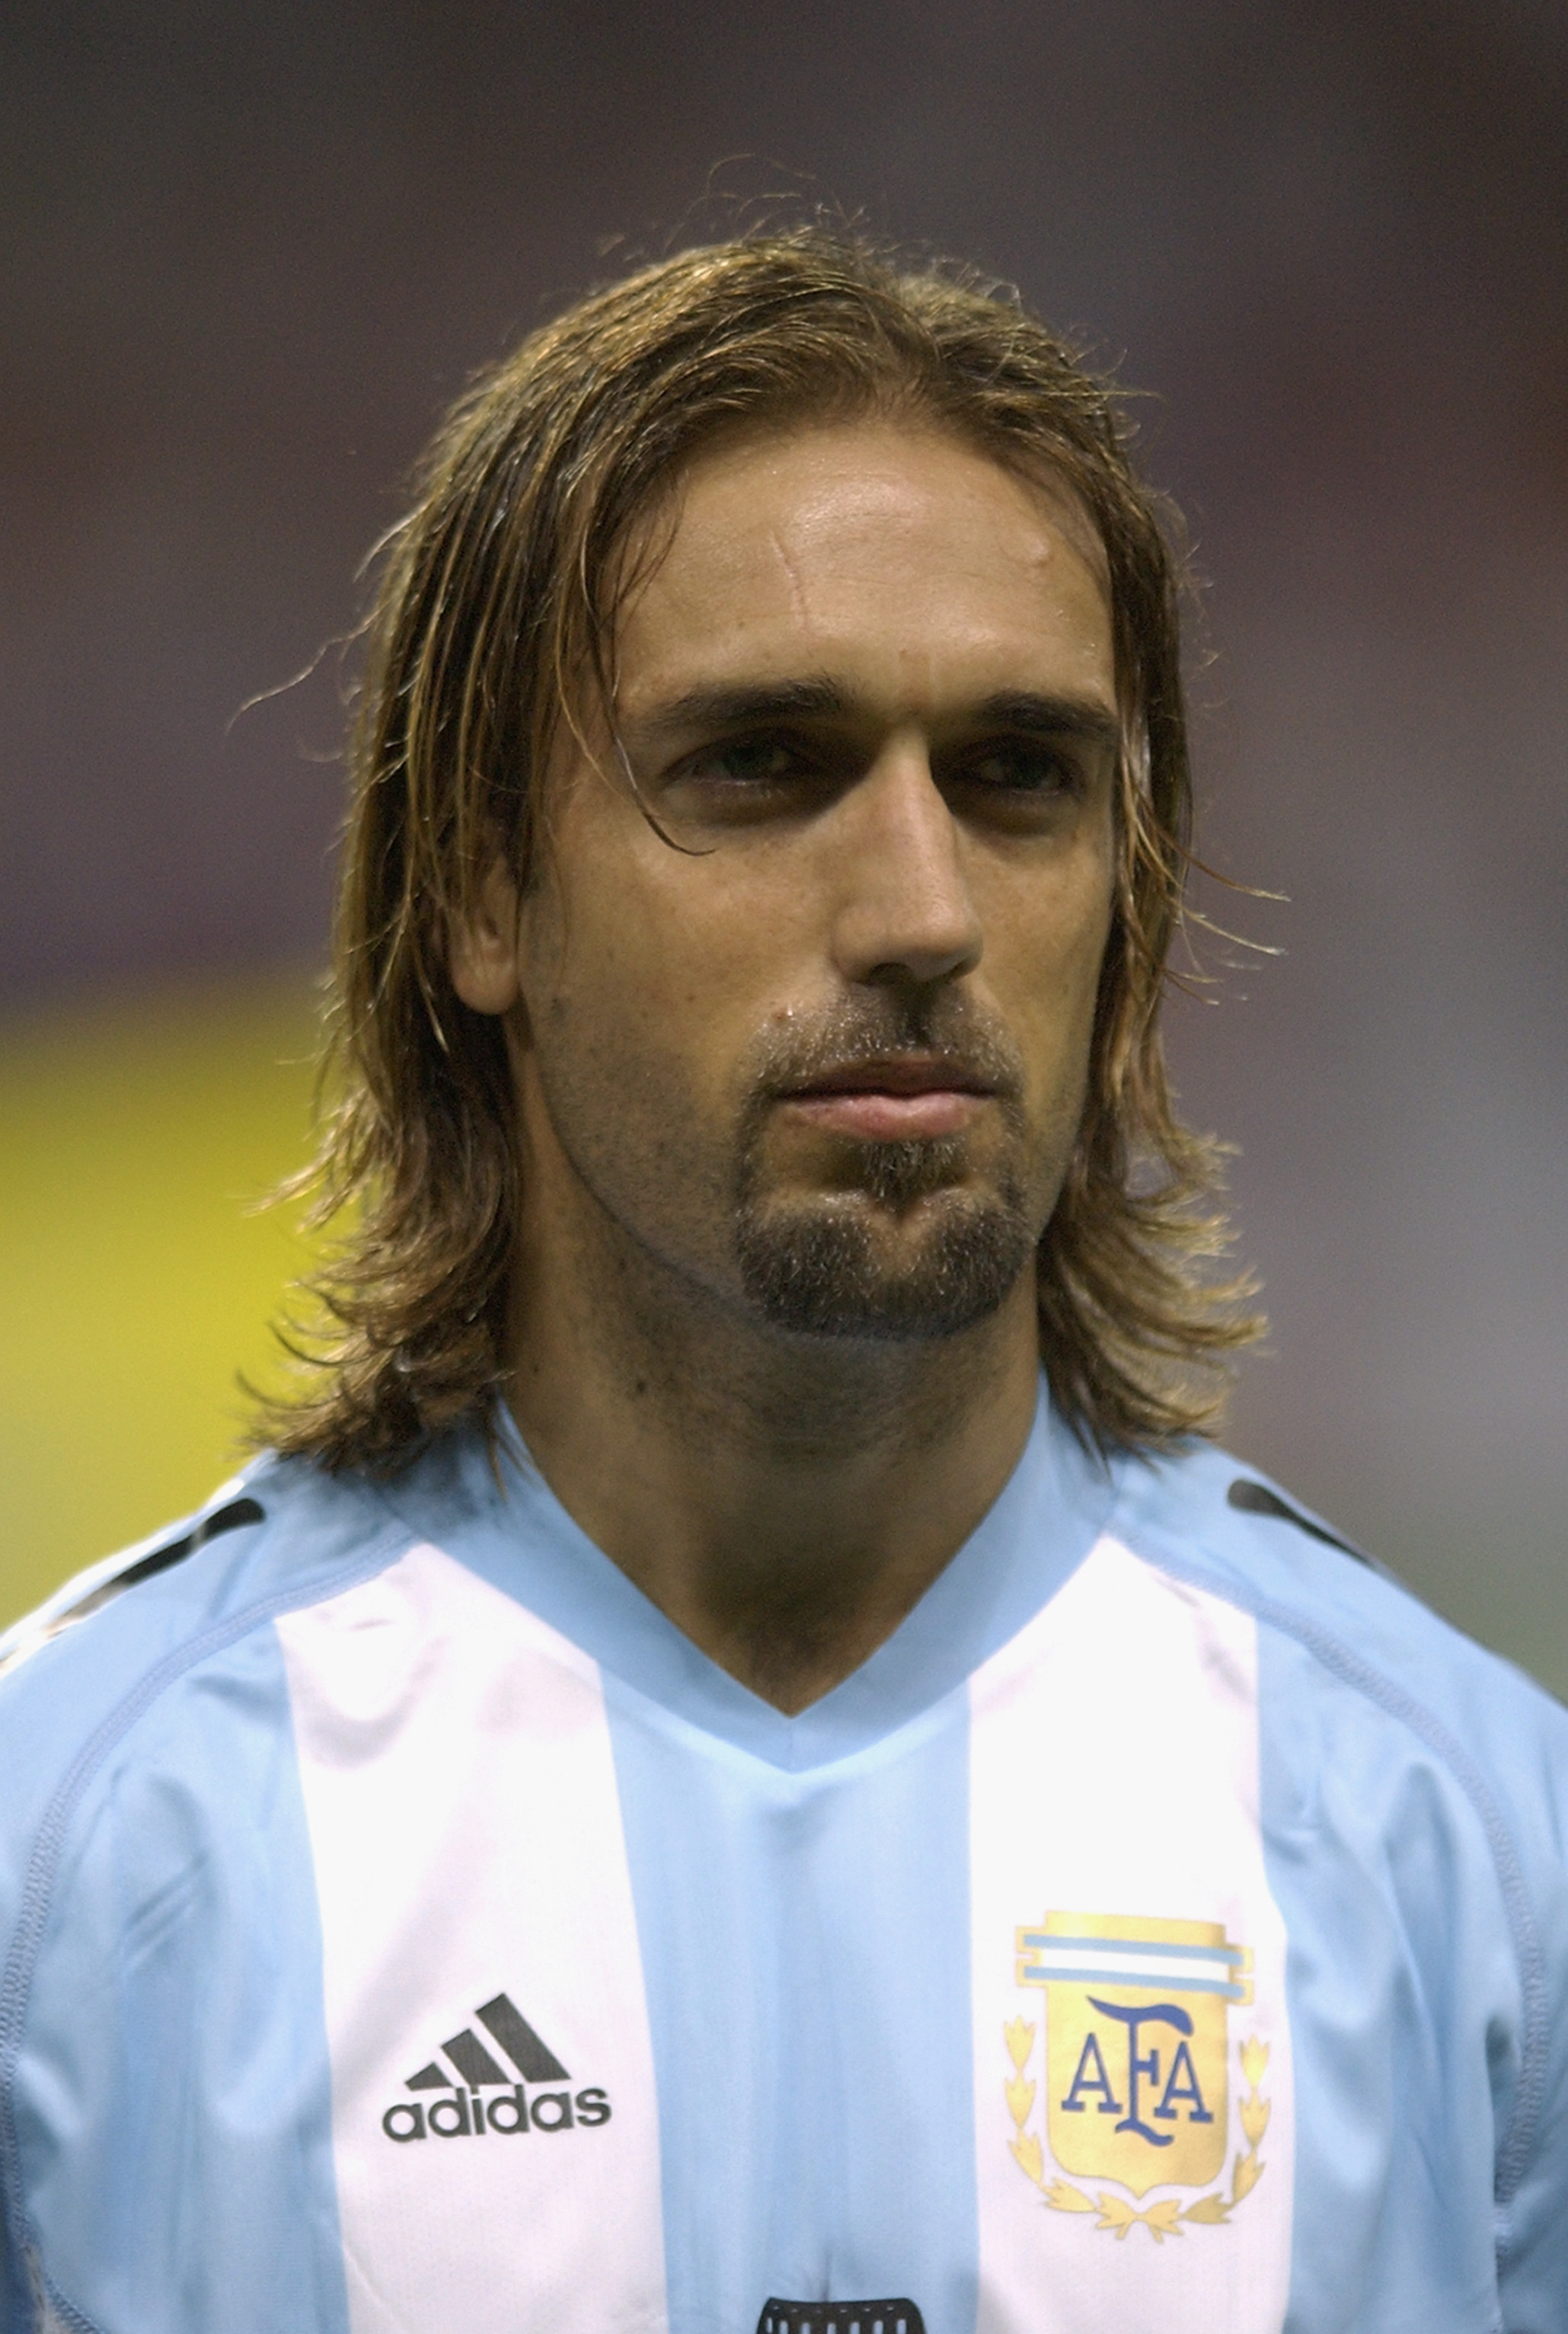 SAPPORO - JUNE 7:  Portrait of Gabriel Batistuta of Argentina before the FIFA World Cup Finals 2002 Group F match between England and Argentina played at the Sapporo Dome, in Sapporo, Japan on June 7, 2002. England won the match 1-0. DIGITAL IMAGE. (Photo